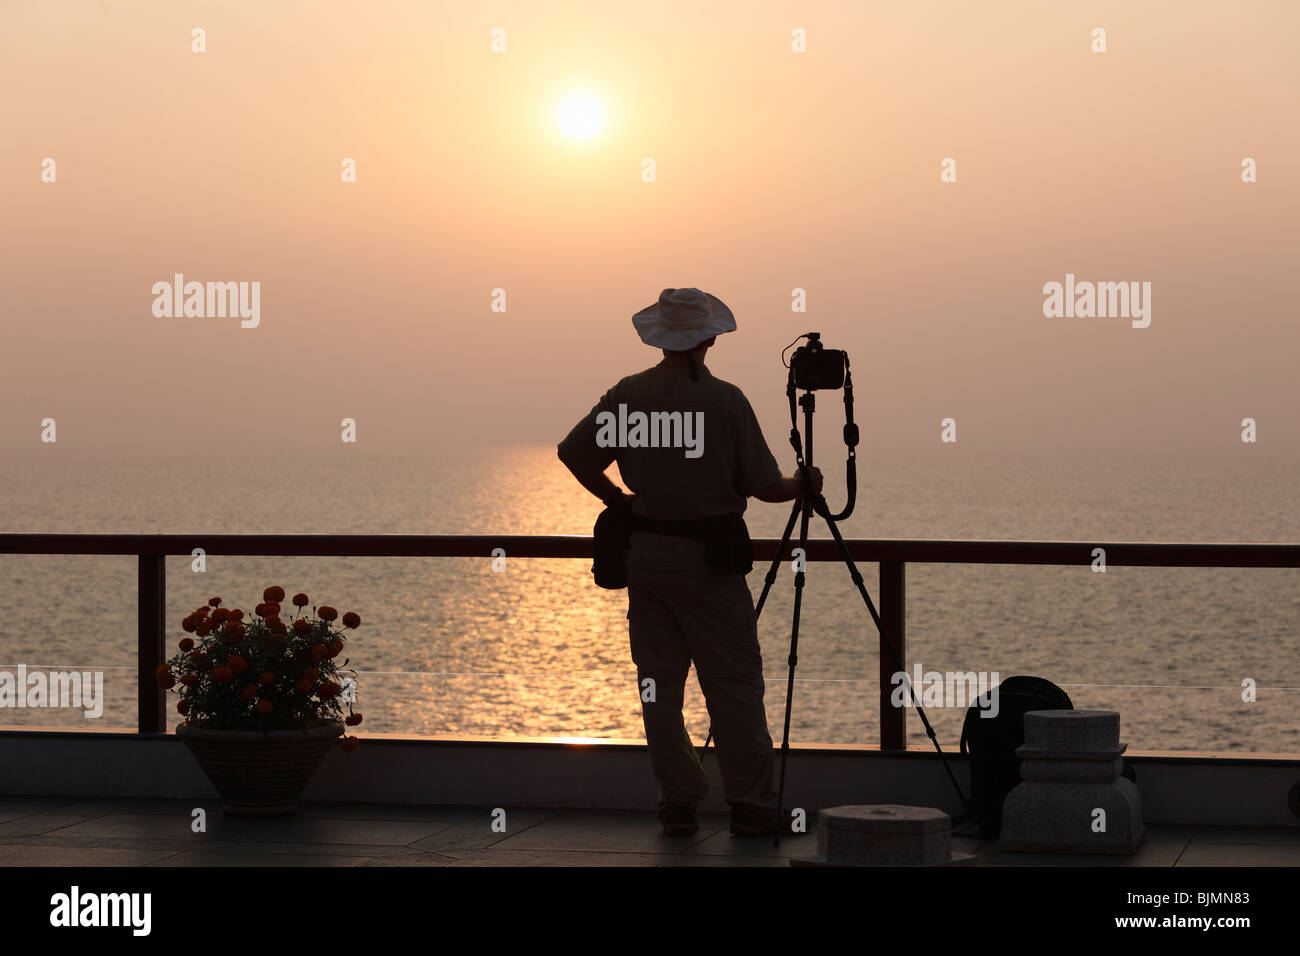 Photographer with a camera on a tripod in front of the sunset by the sea, Kovalam, Kerala, southern India, India, Asia Stock Photo